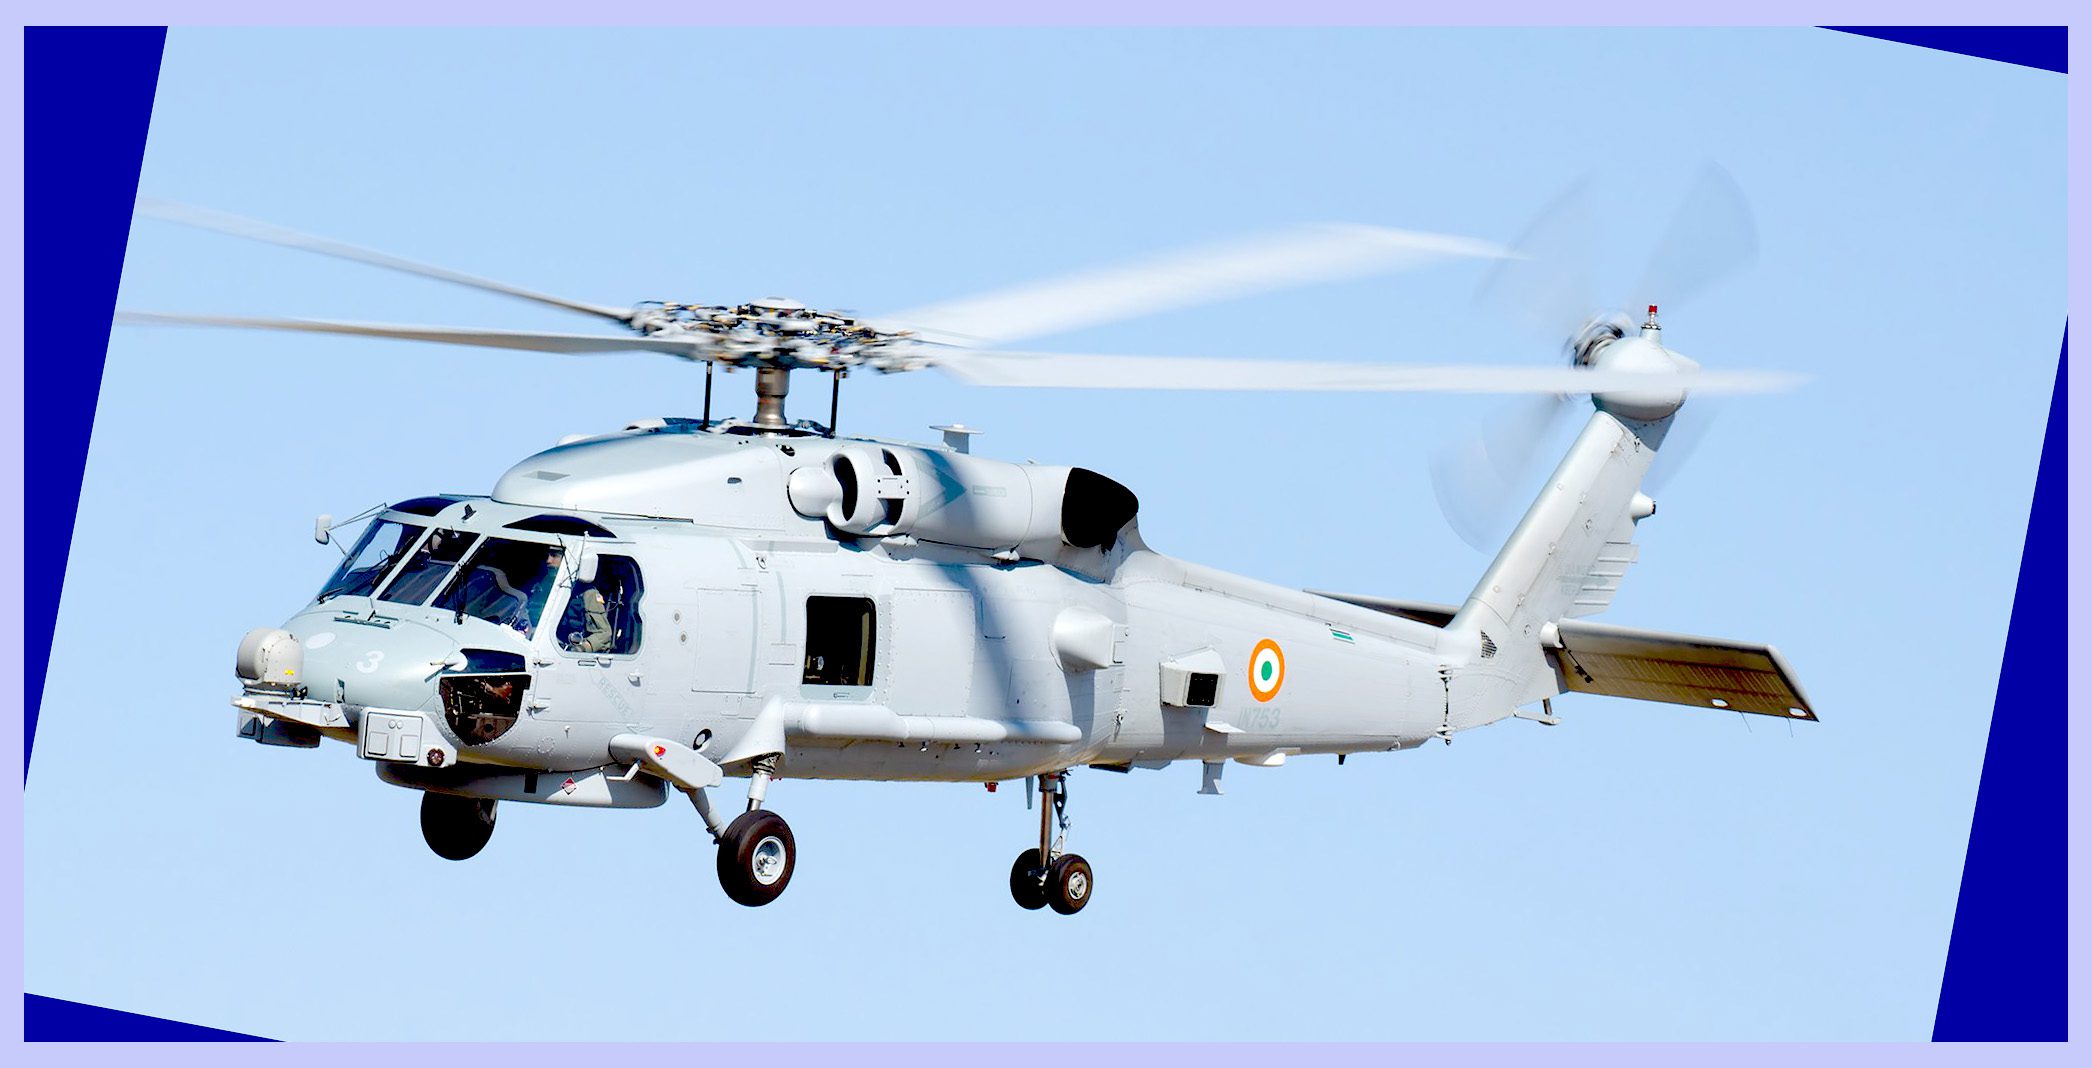 Photo Credit: Indian Navy / MH-60R Romeo